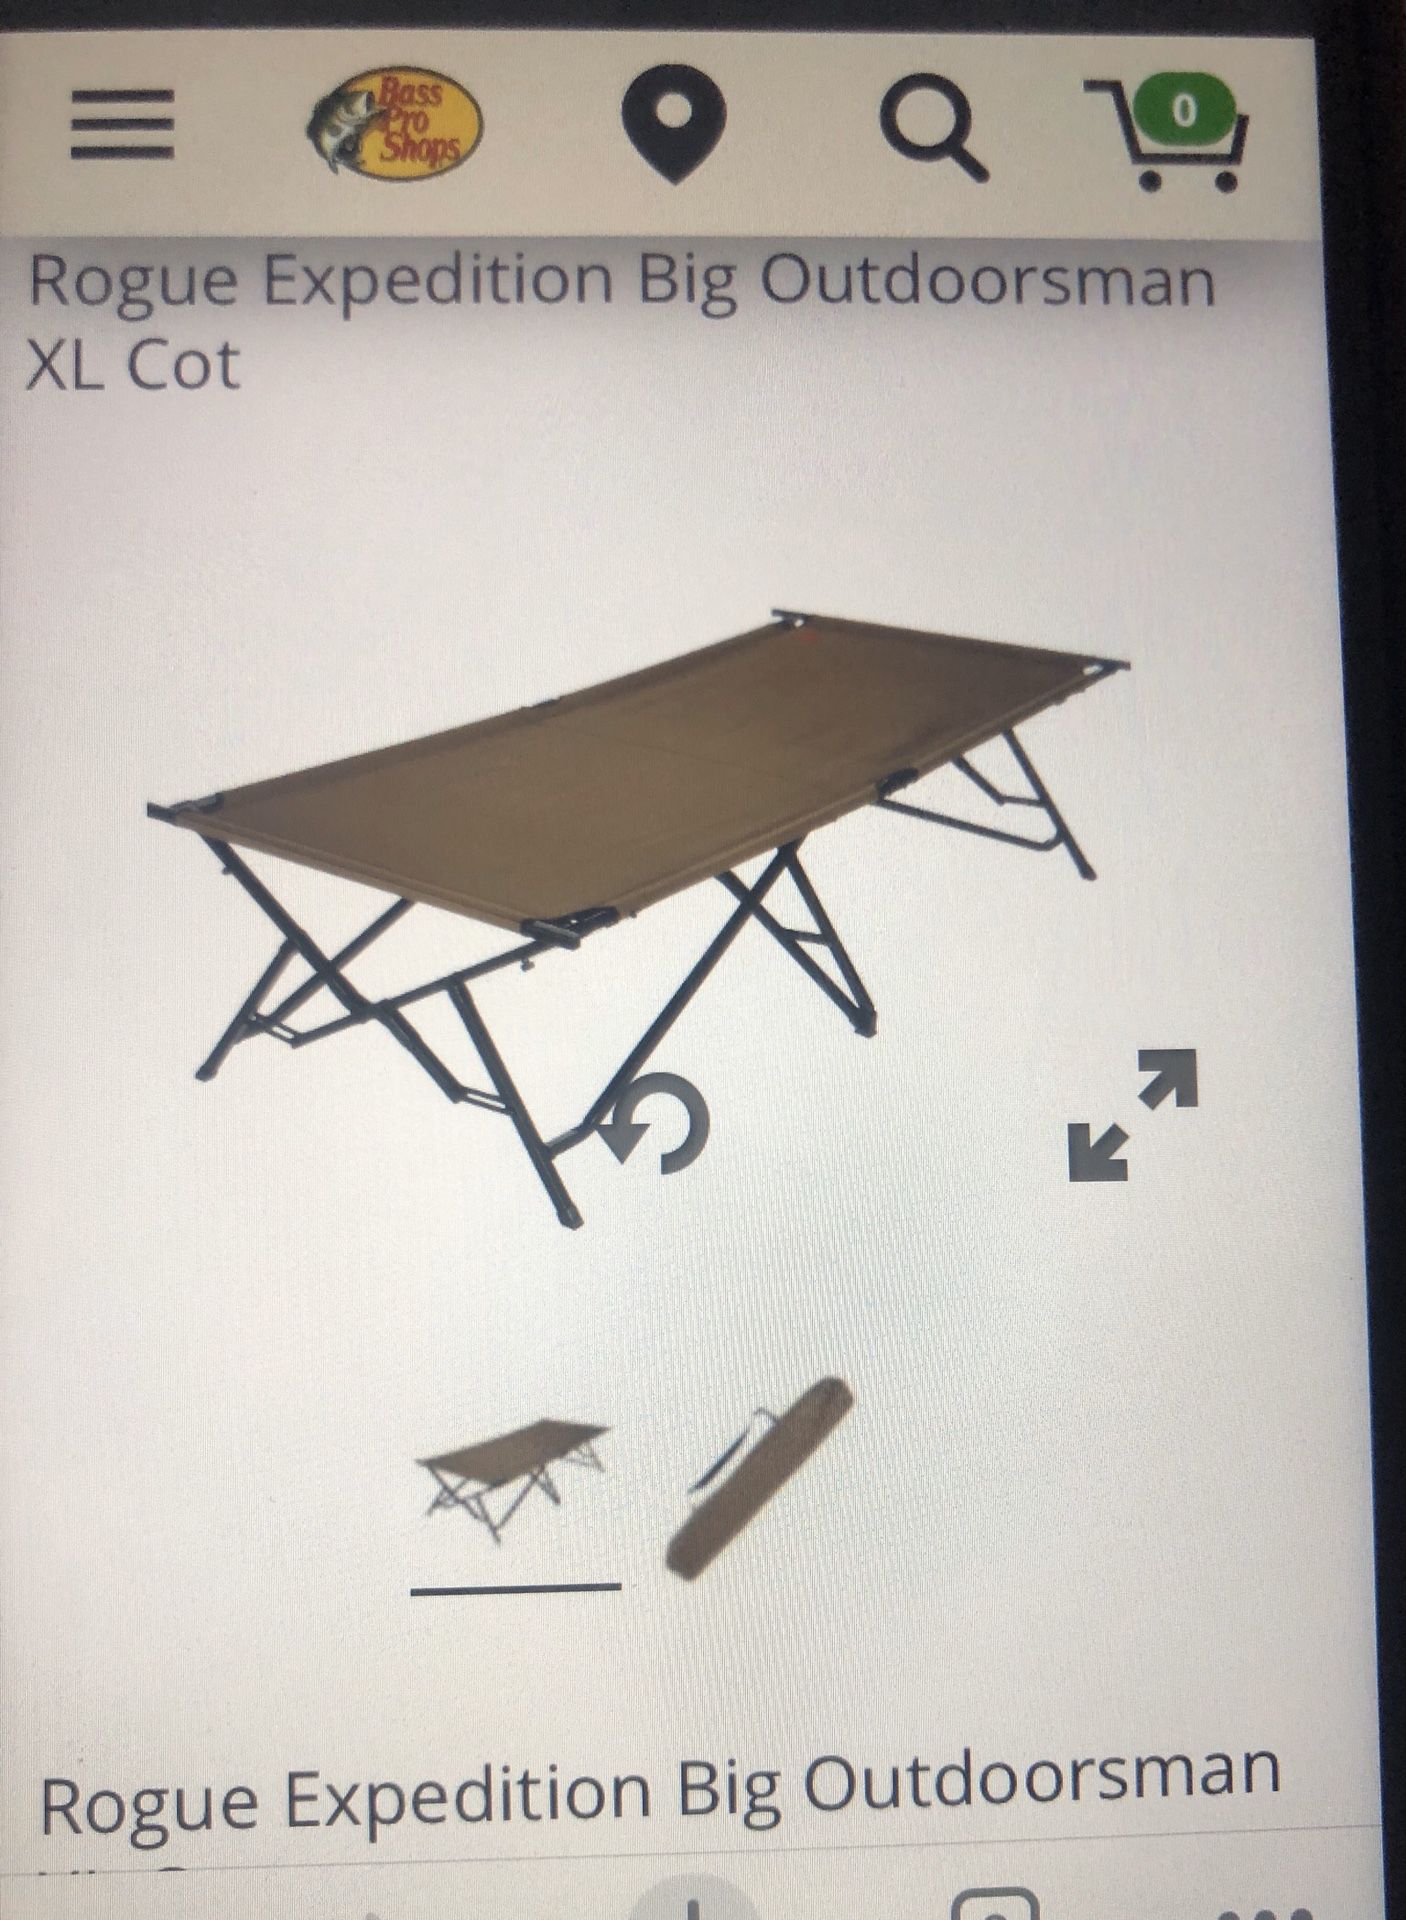 Rogue Expedition Camp Cot